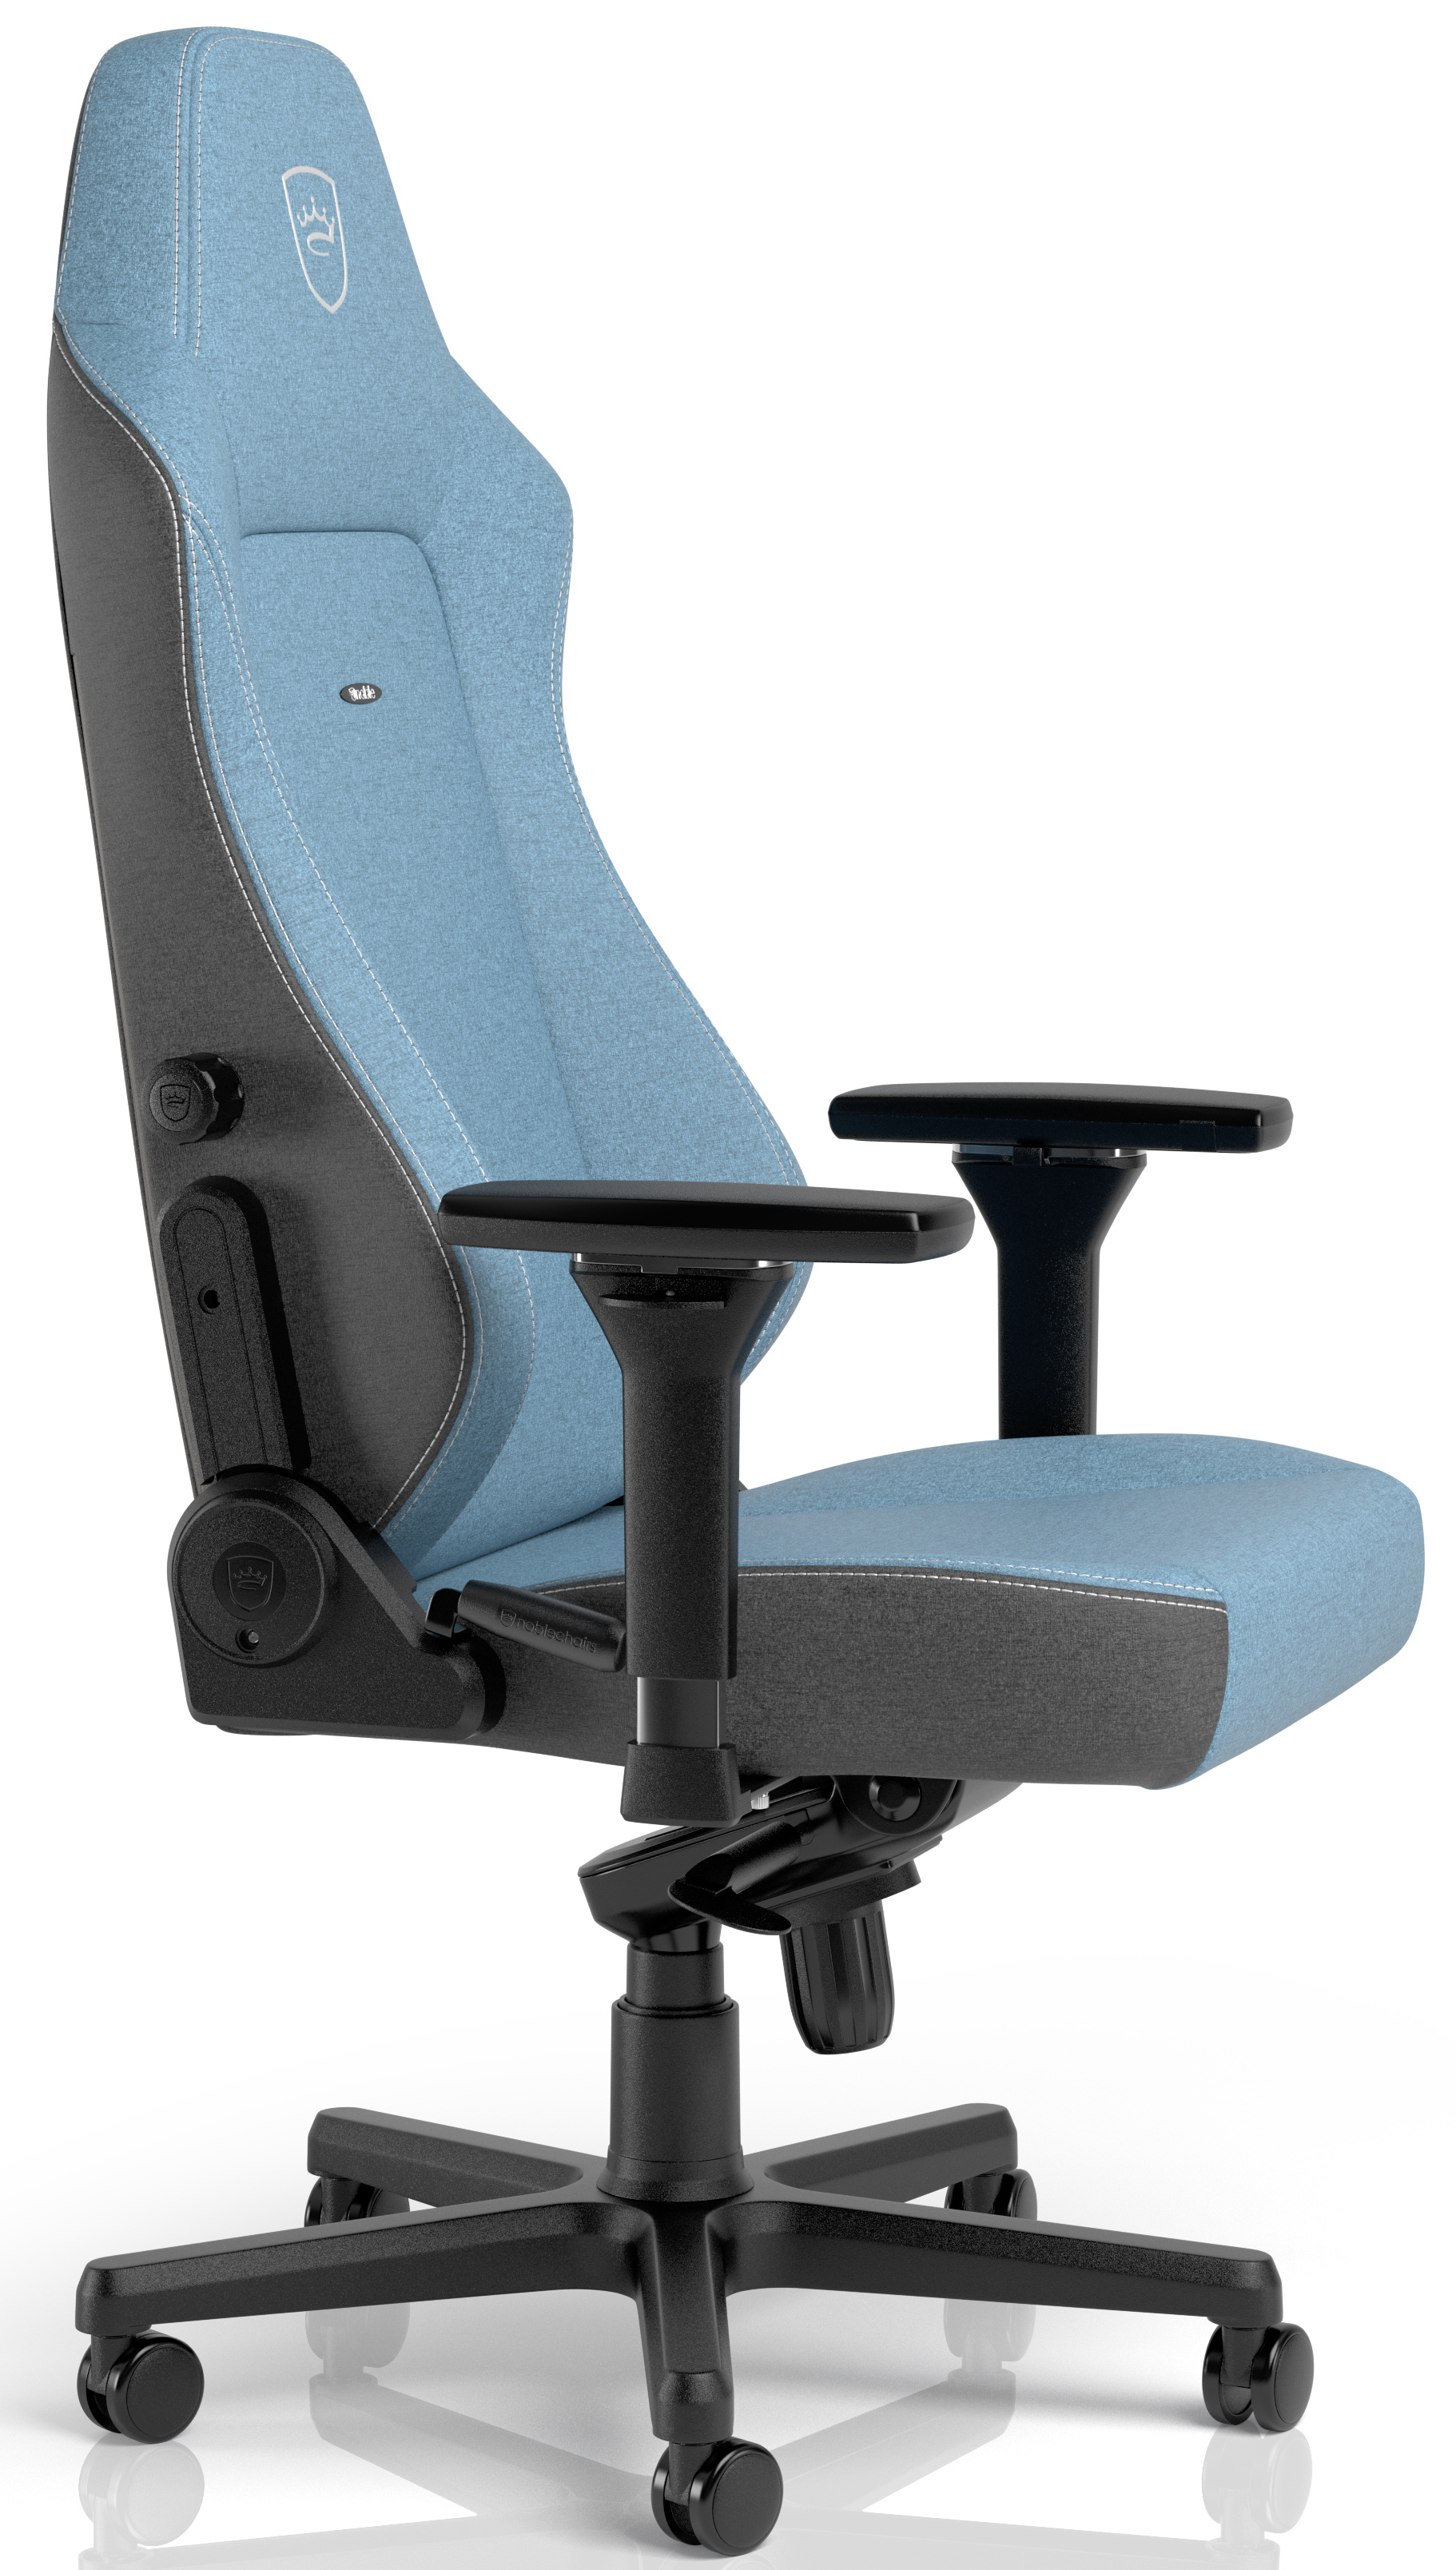 noblechairs - Cadeira noblechairs Hero Two Tone - Blue Limited Edition